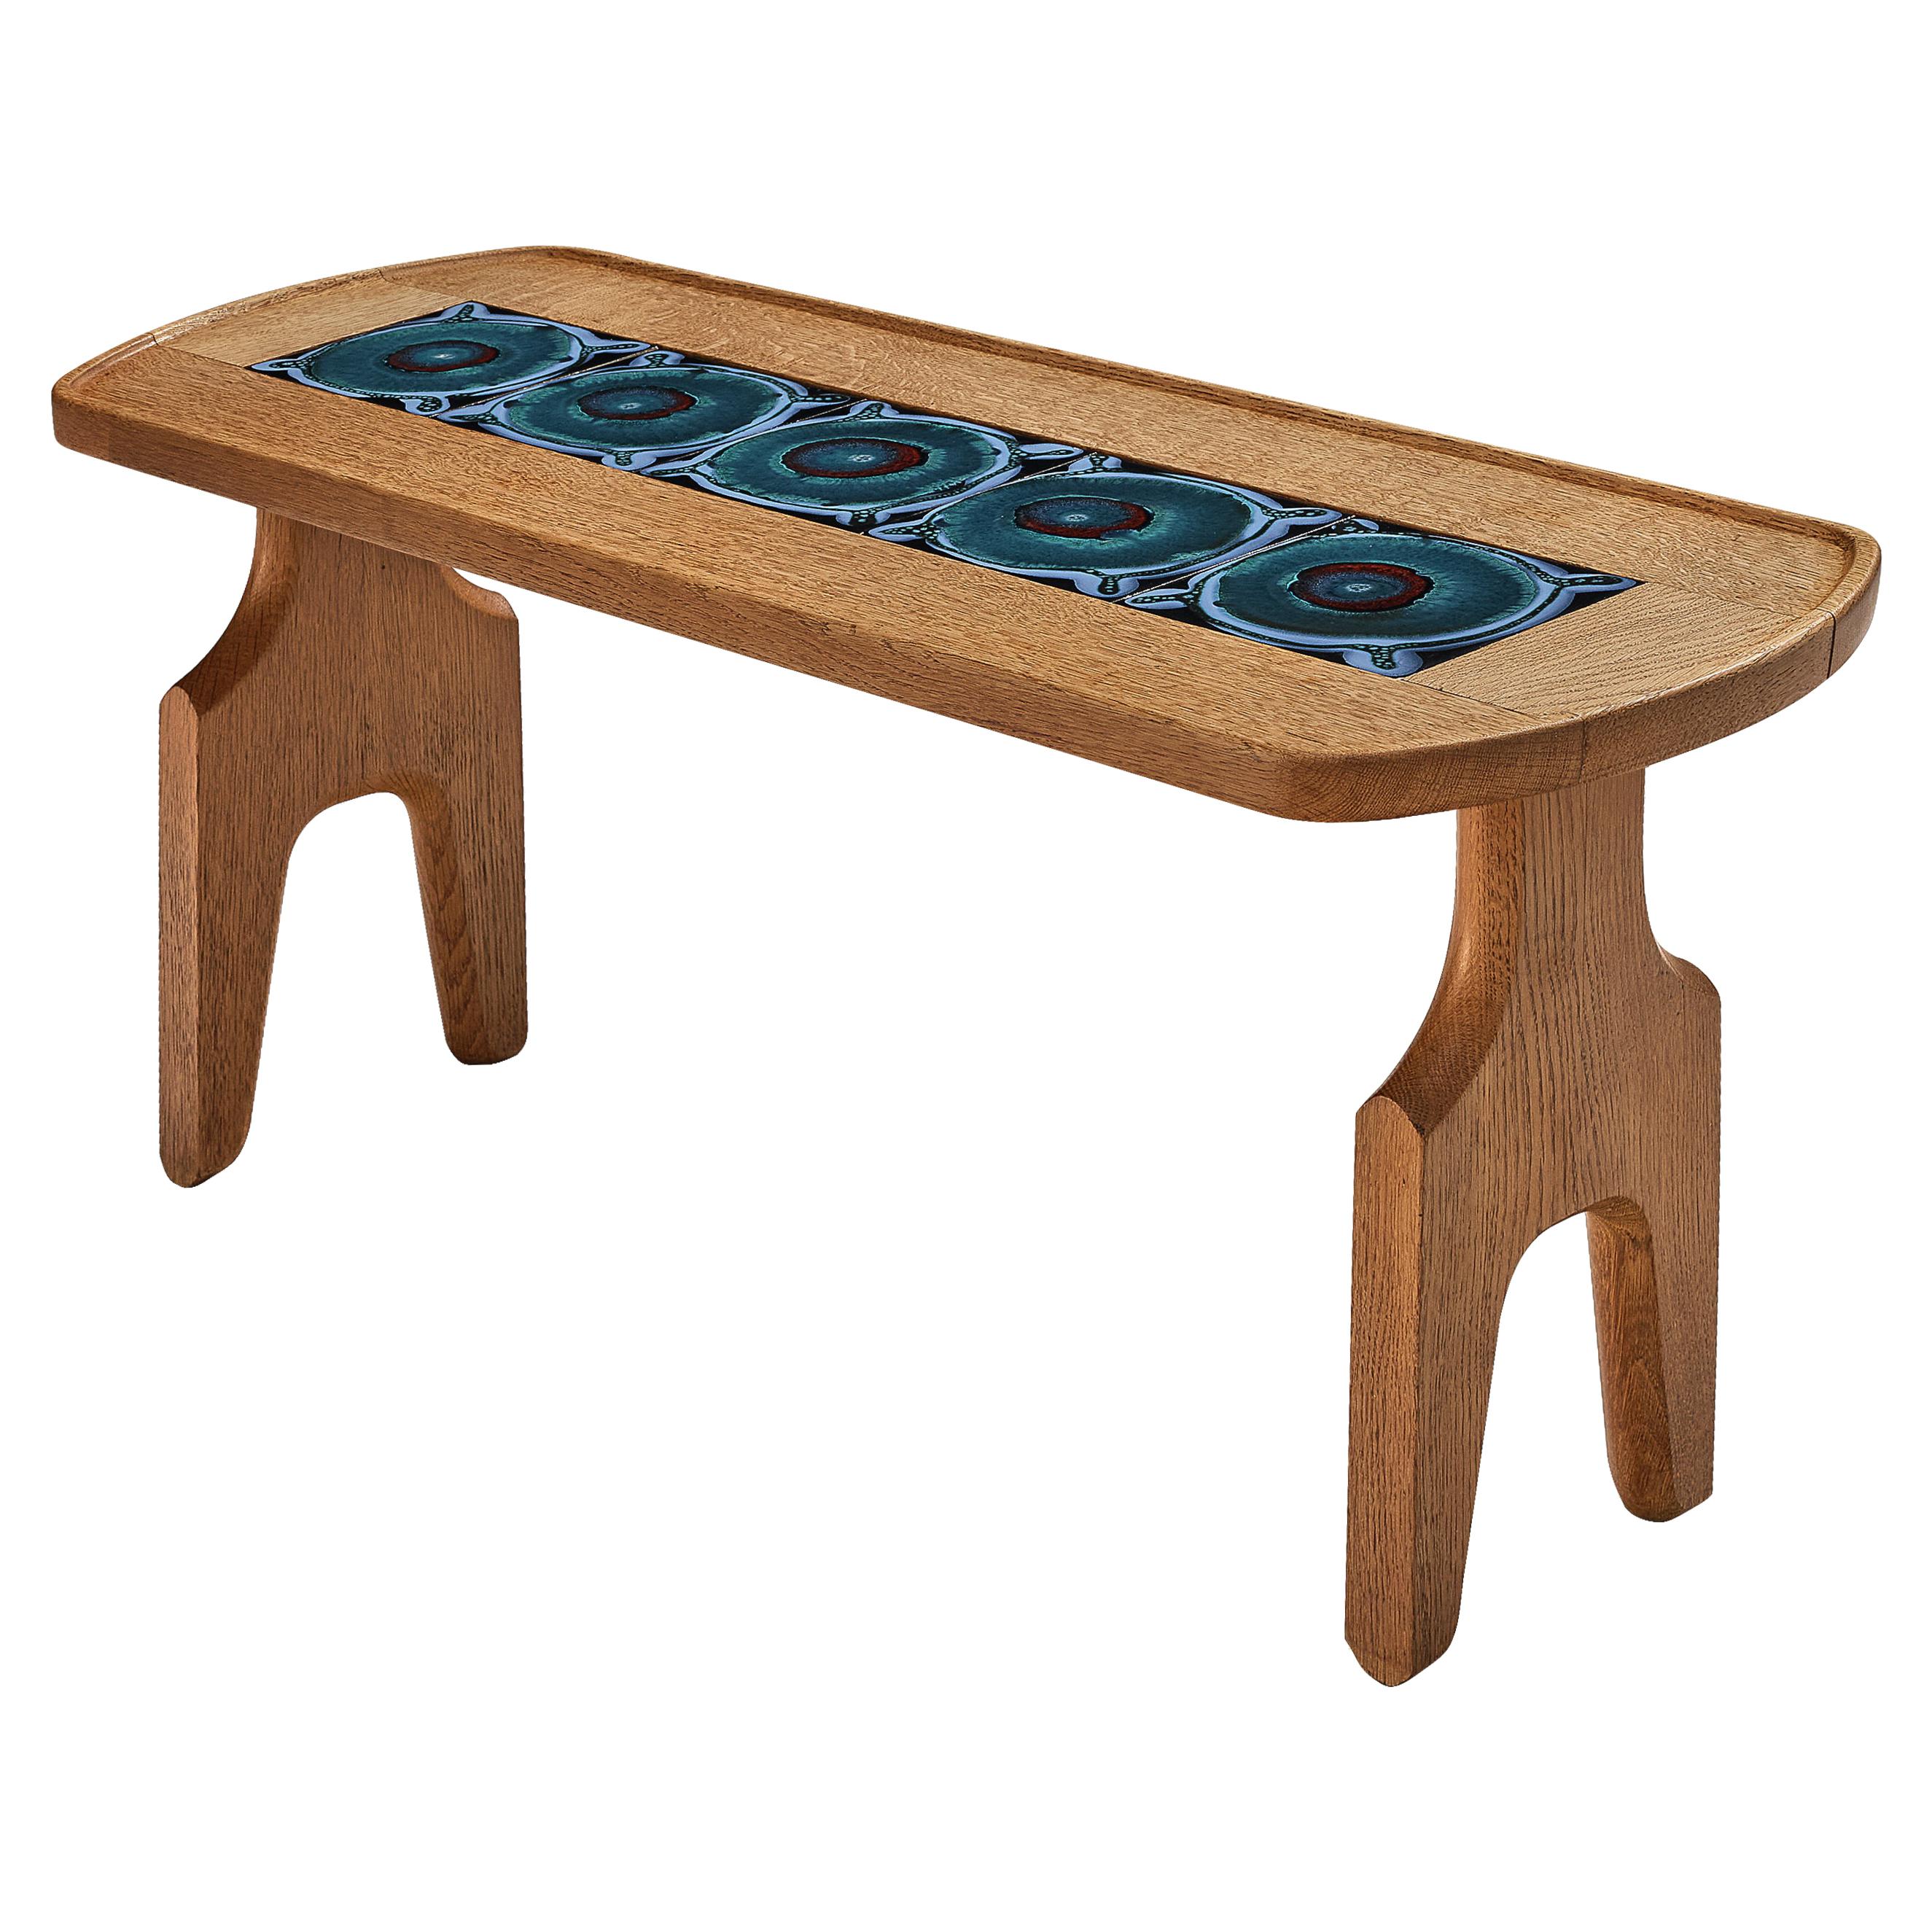 Guillerme et Chambron Coffee Table in Oak with Ceramic Inlay